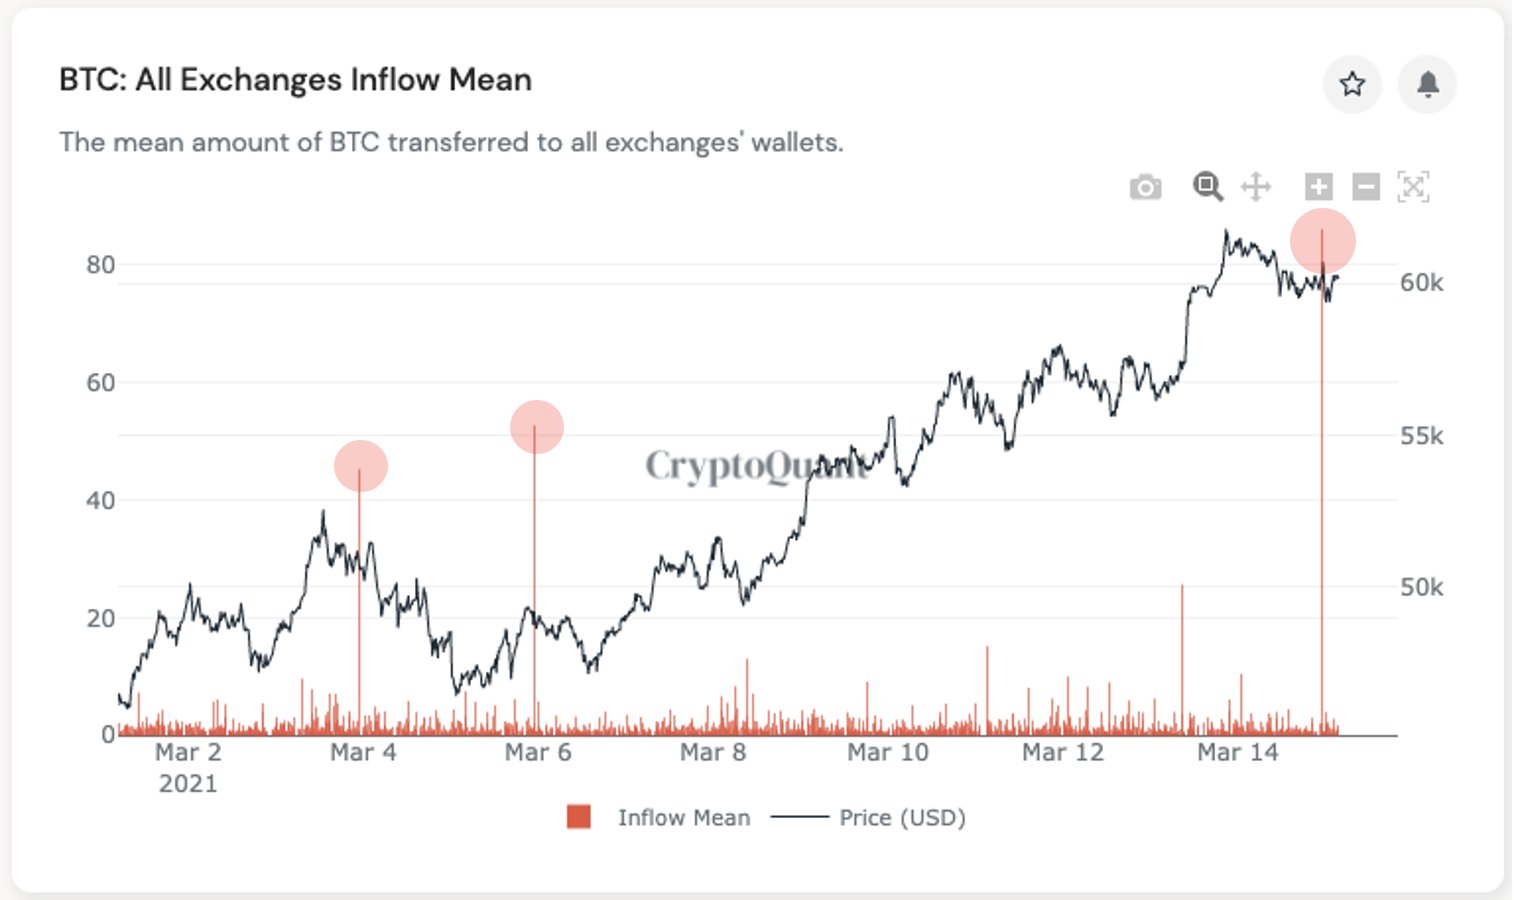 Bitcoin all exchanges inflow mean. Source: CryptoQuant